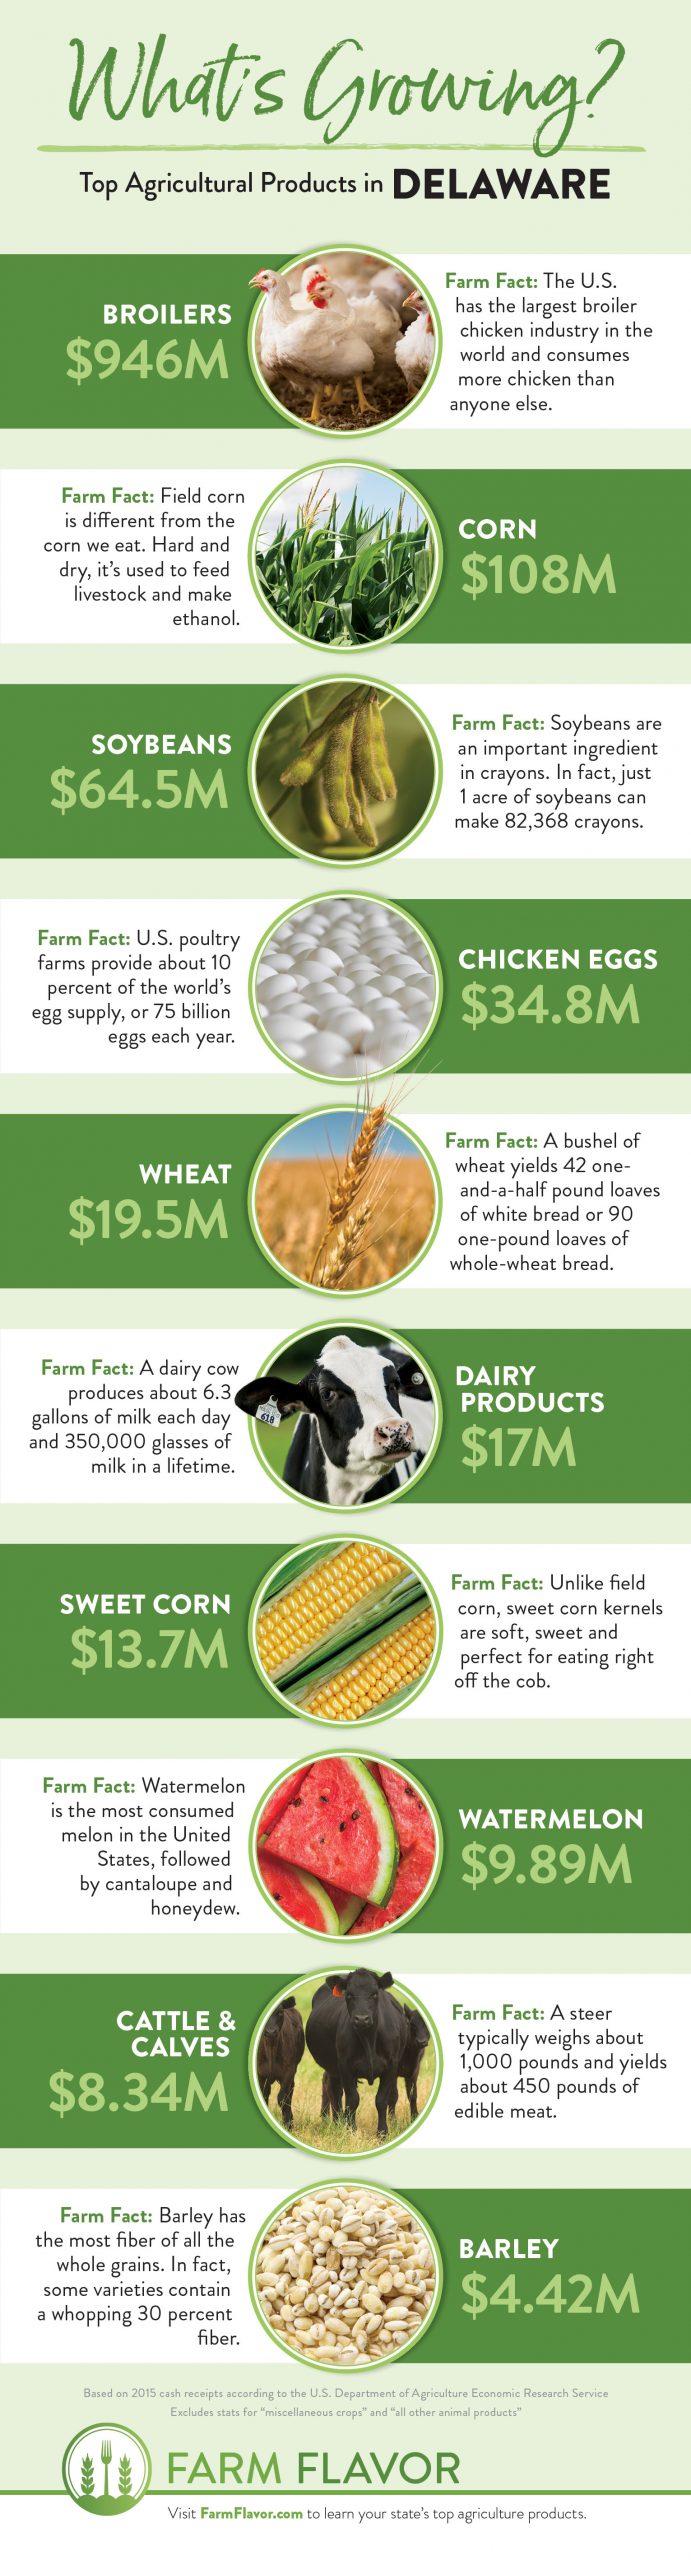 Delaware Top 10 ag products infographic